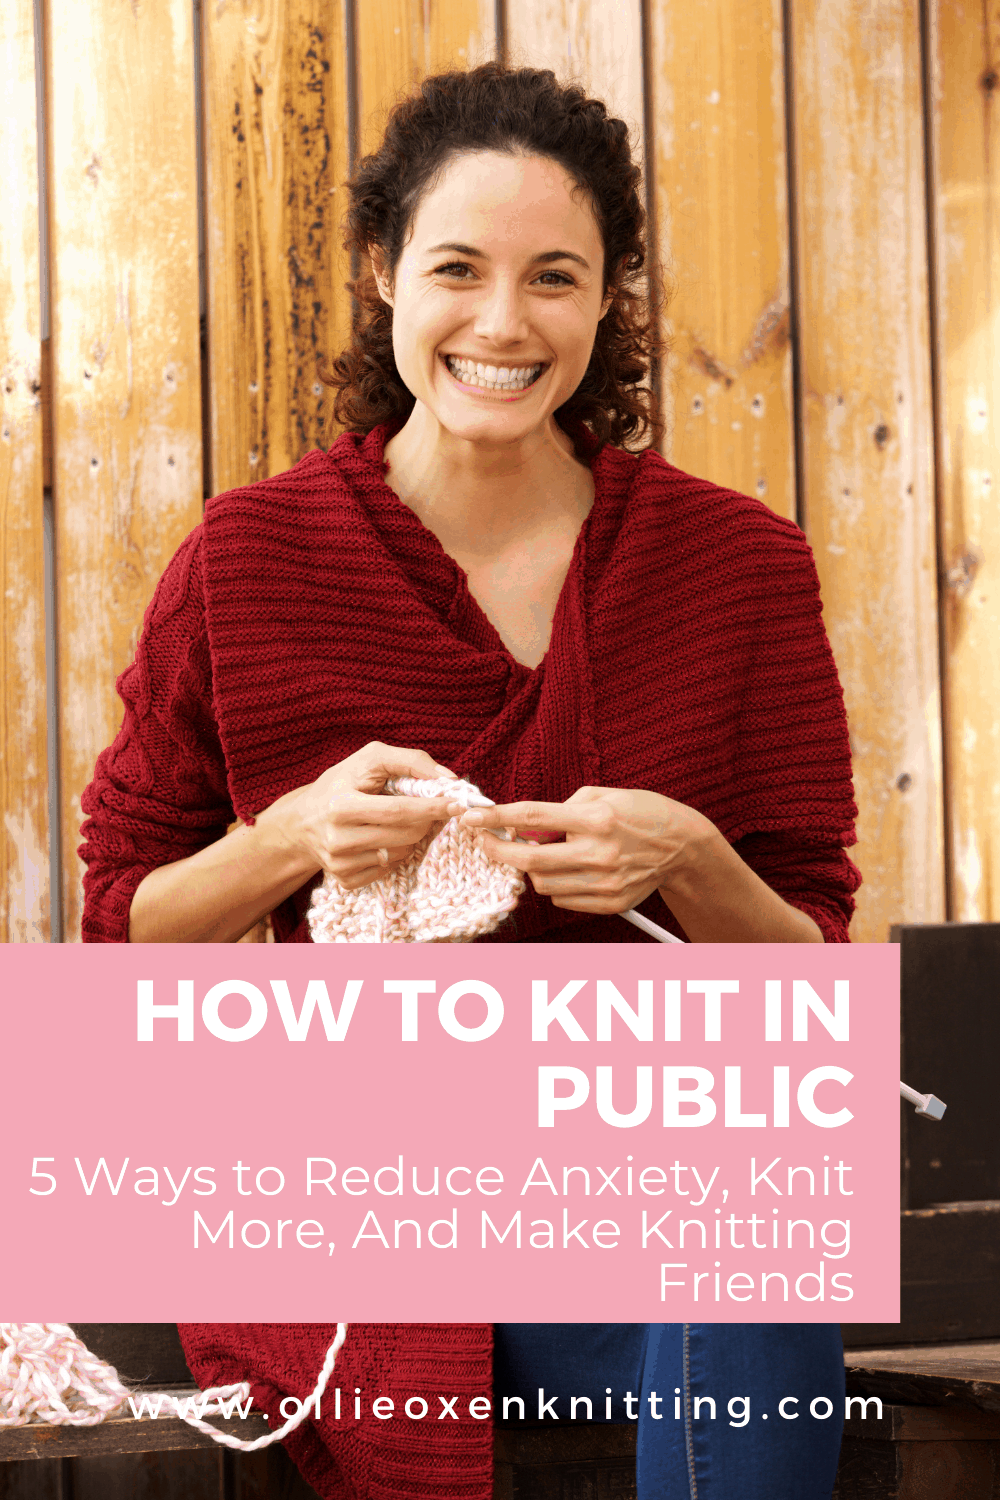 How To Knit In Public: 5 Ways to Reduce Anxiety, Knit More, And Make Knitting Friends | Ollie Oxen Knitting